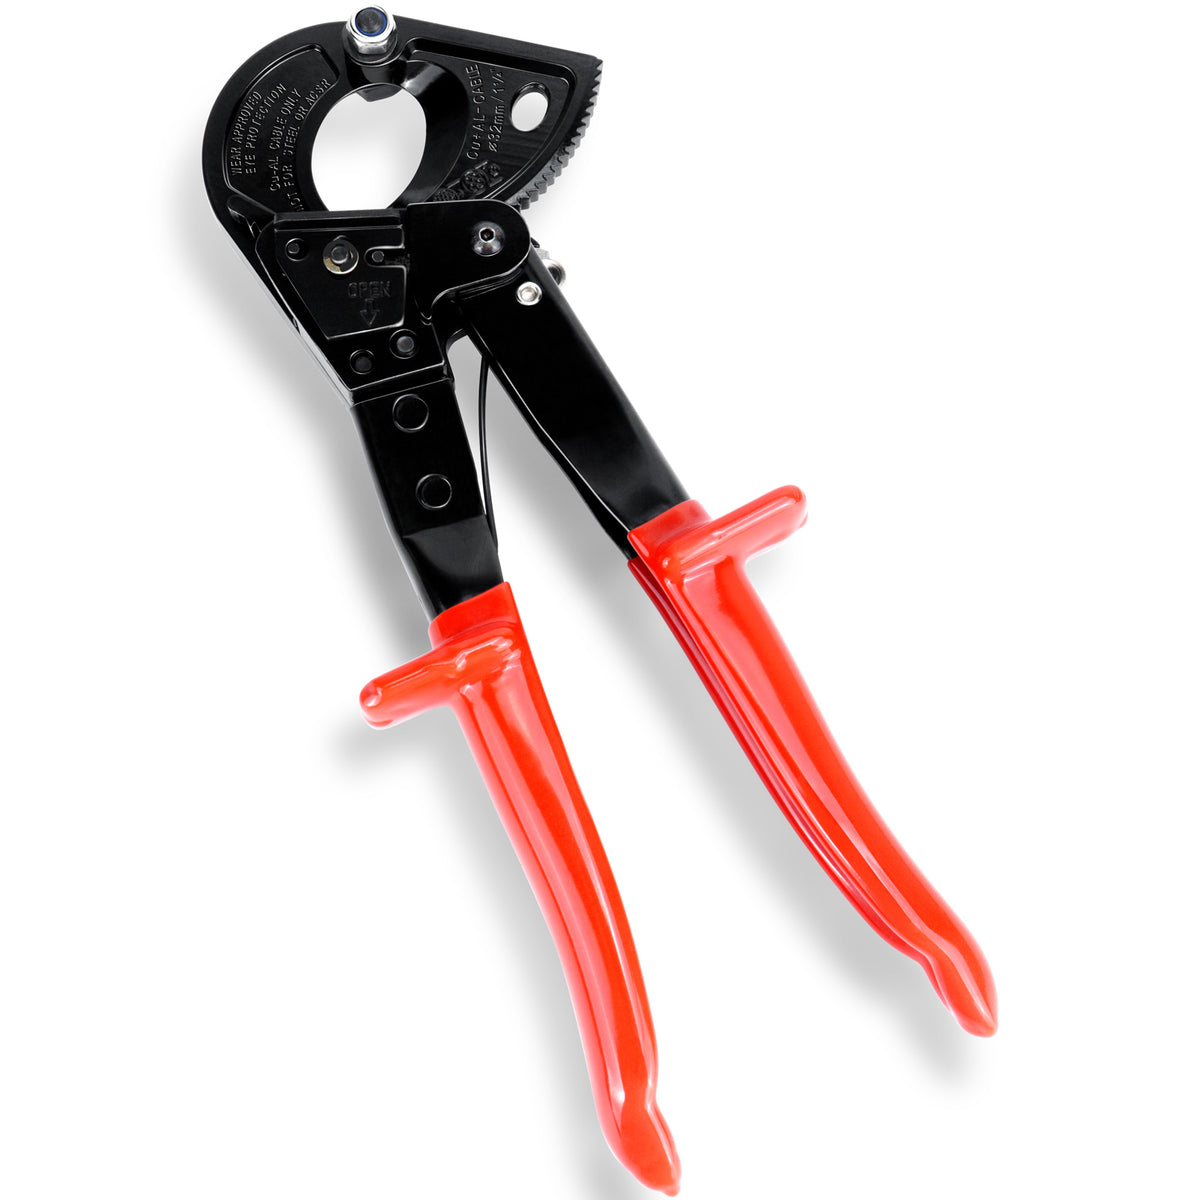 New Heavy Duty Ratchet Cable Cutter pliers Ratcheting Wire Cut 300-500mm² 